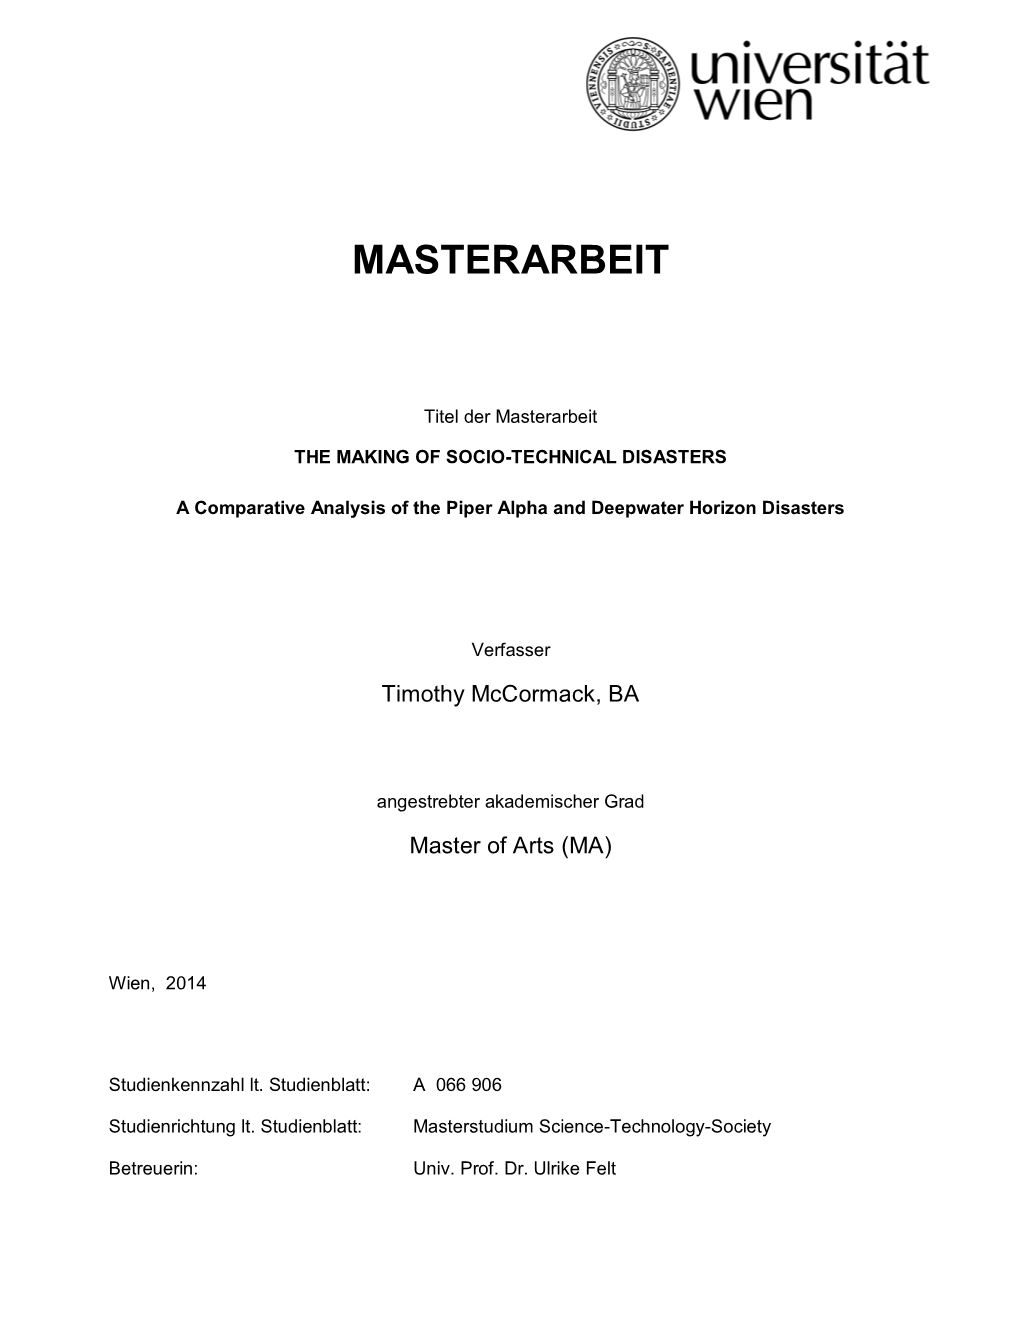 MA Thesis T.Mccormack